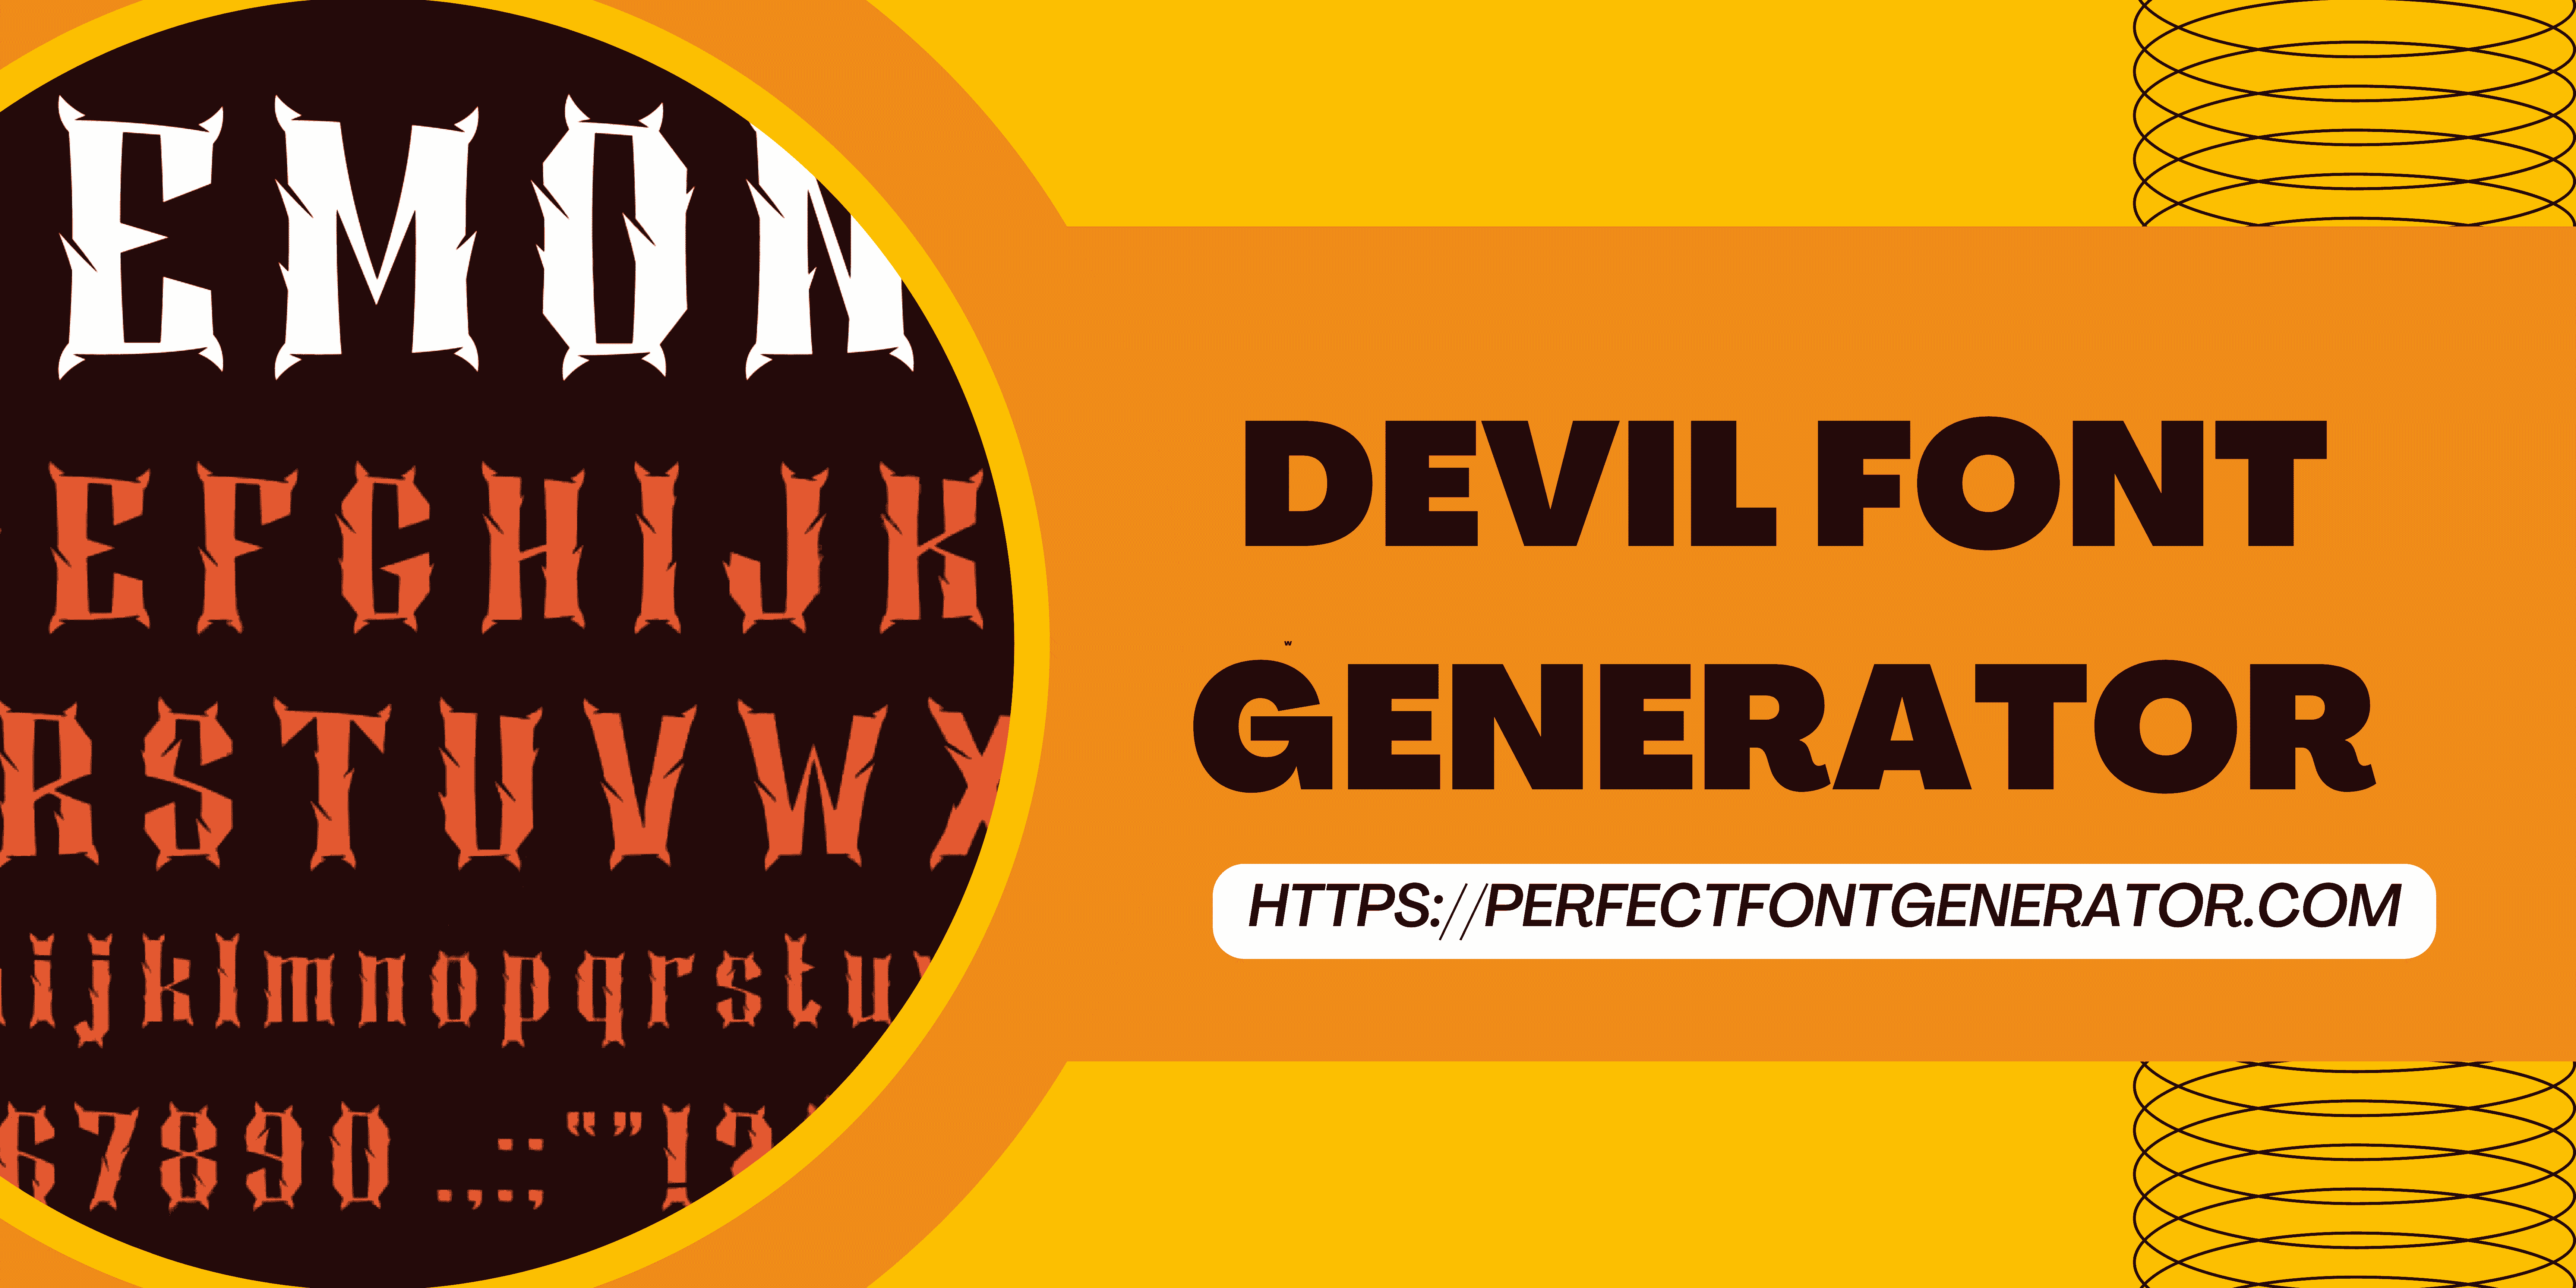 Devil Font: Generate Sinister and Stylish Text Online